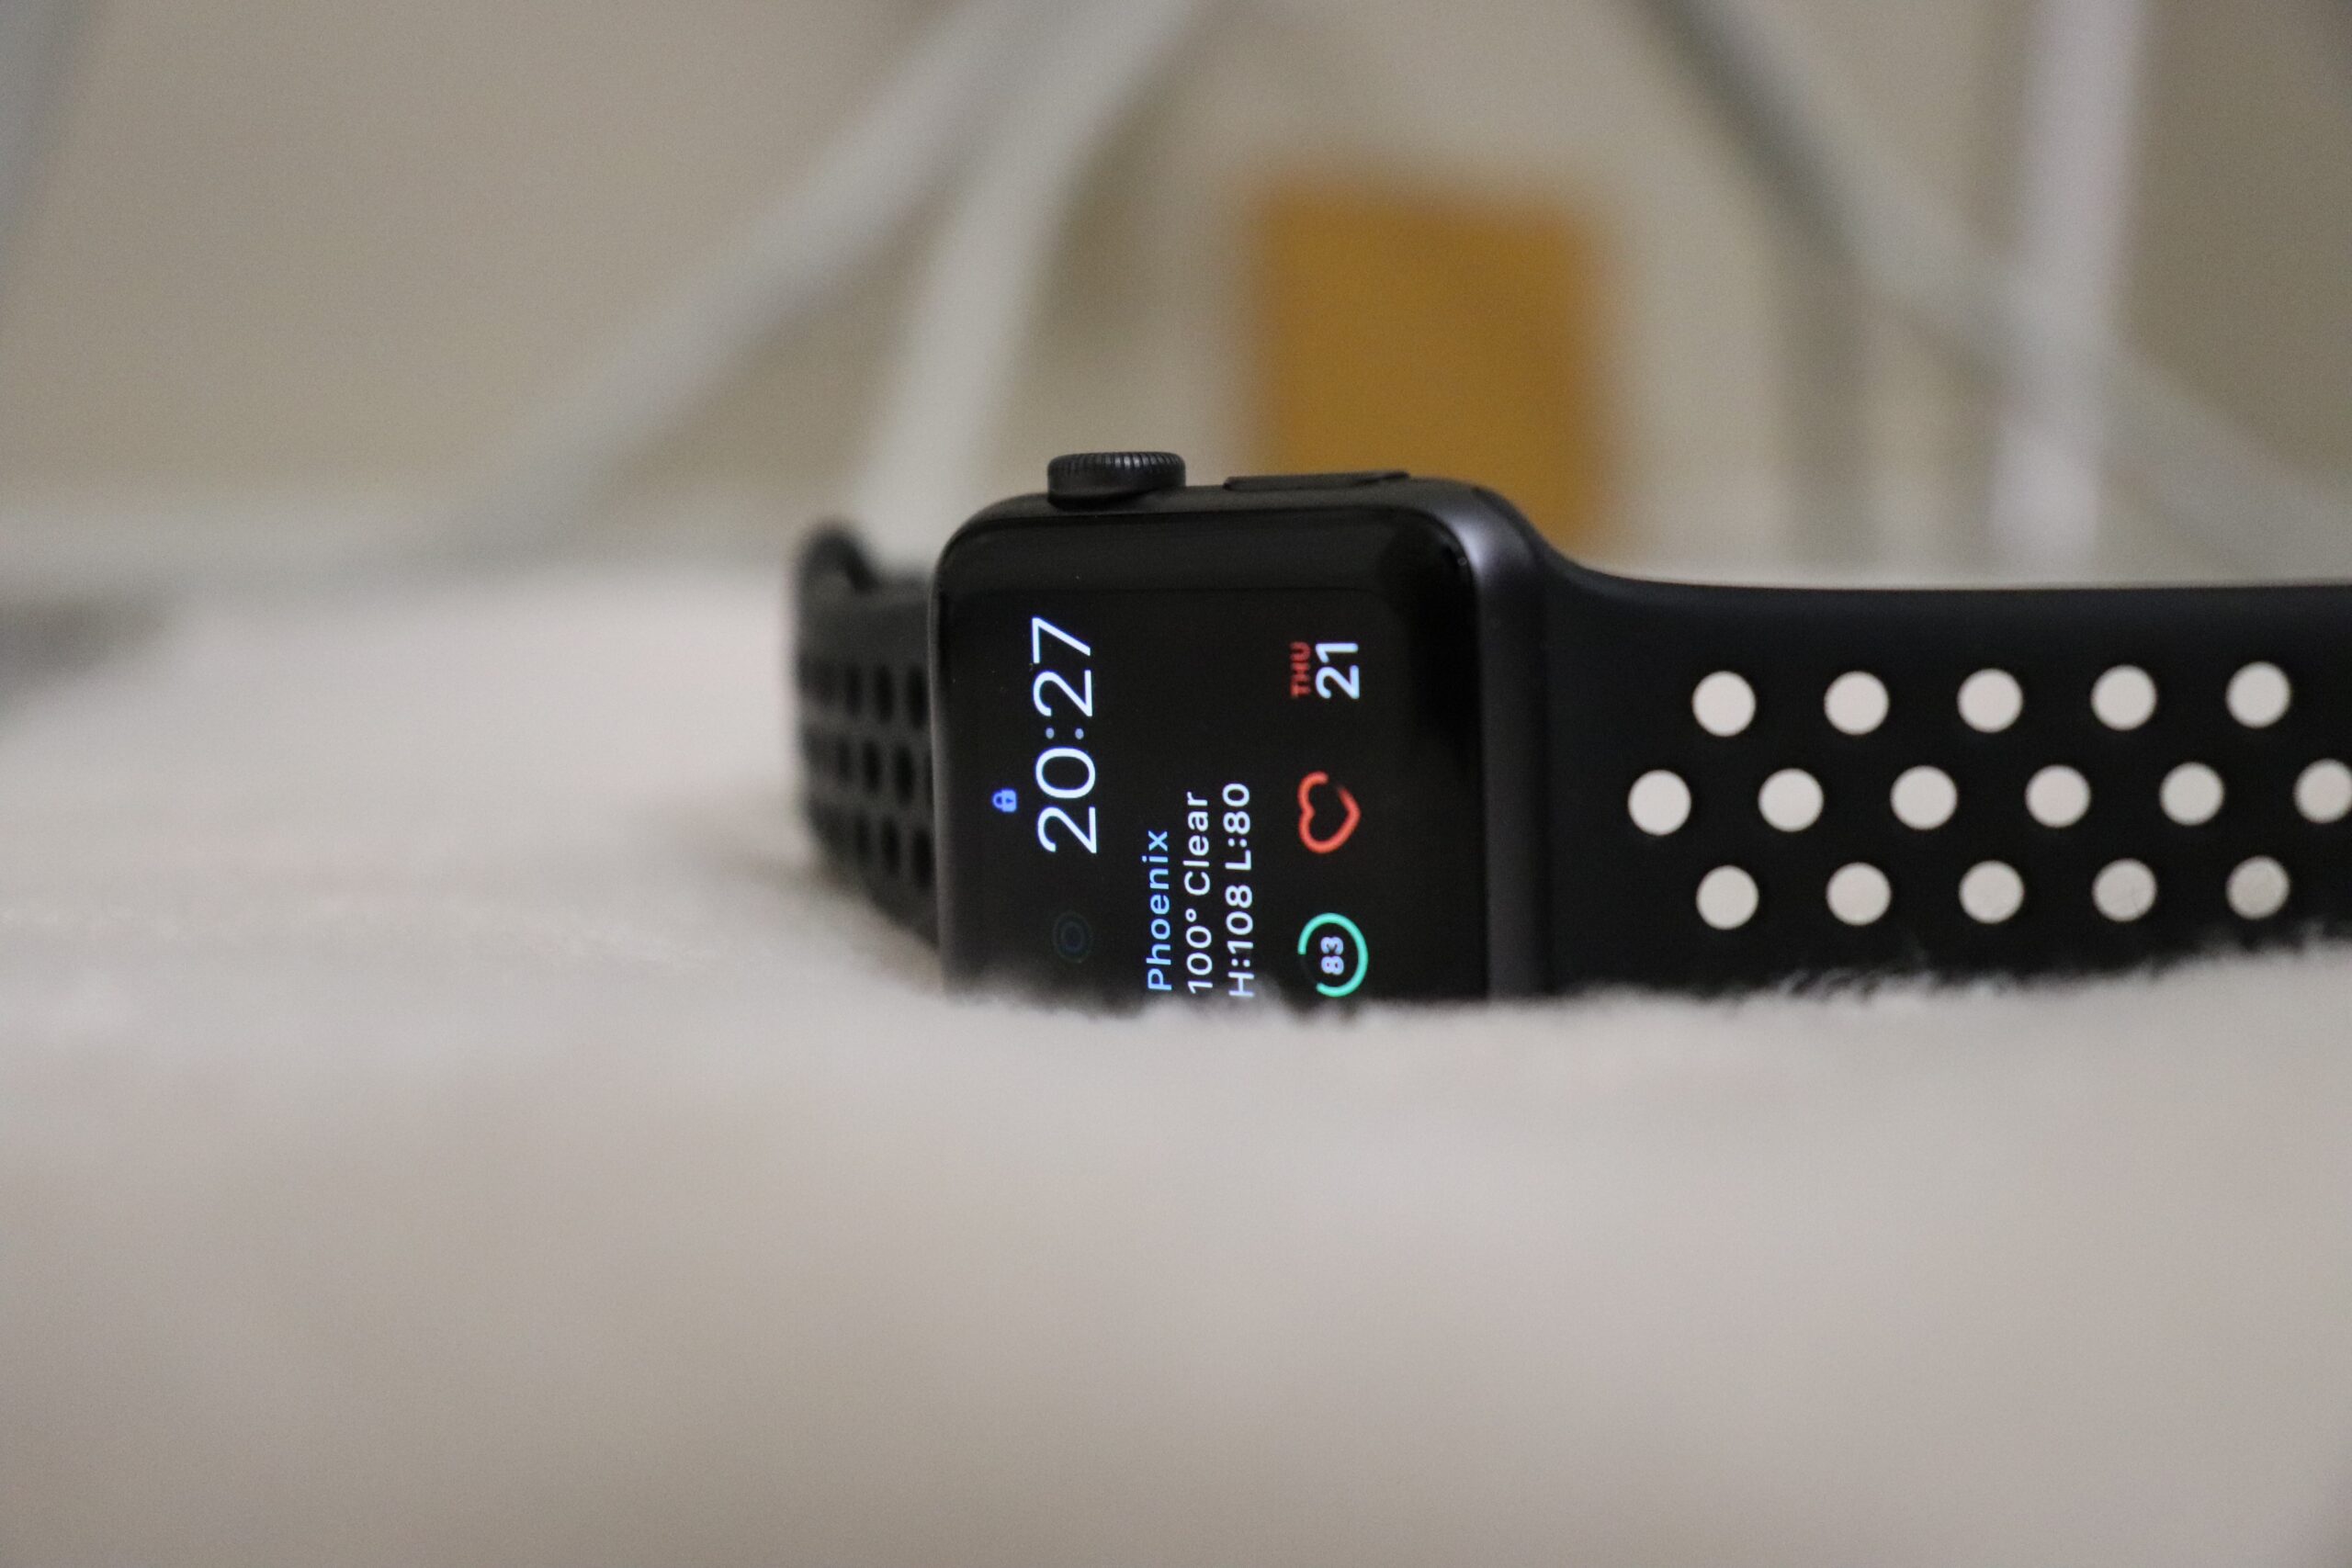 HealthTech developers for hire | Picture of a smart watch sitting on its side on a blurred, but fuzzy-looking fabric. The band to the watch is black and has perforated holes on it.